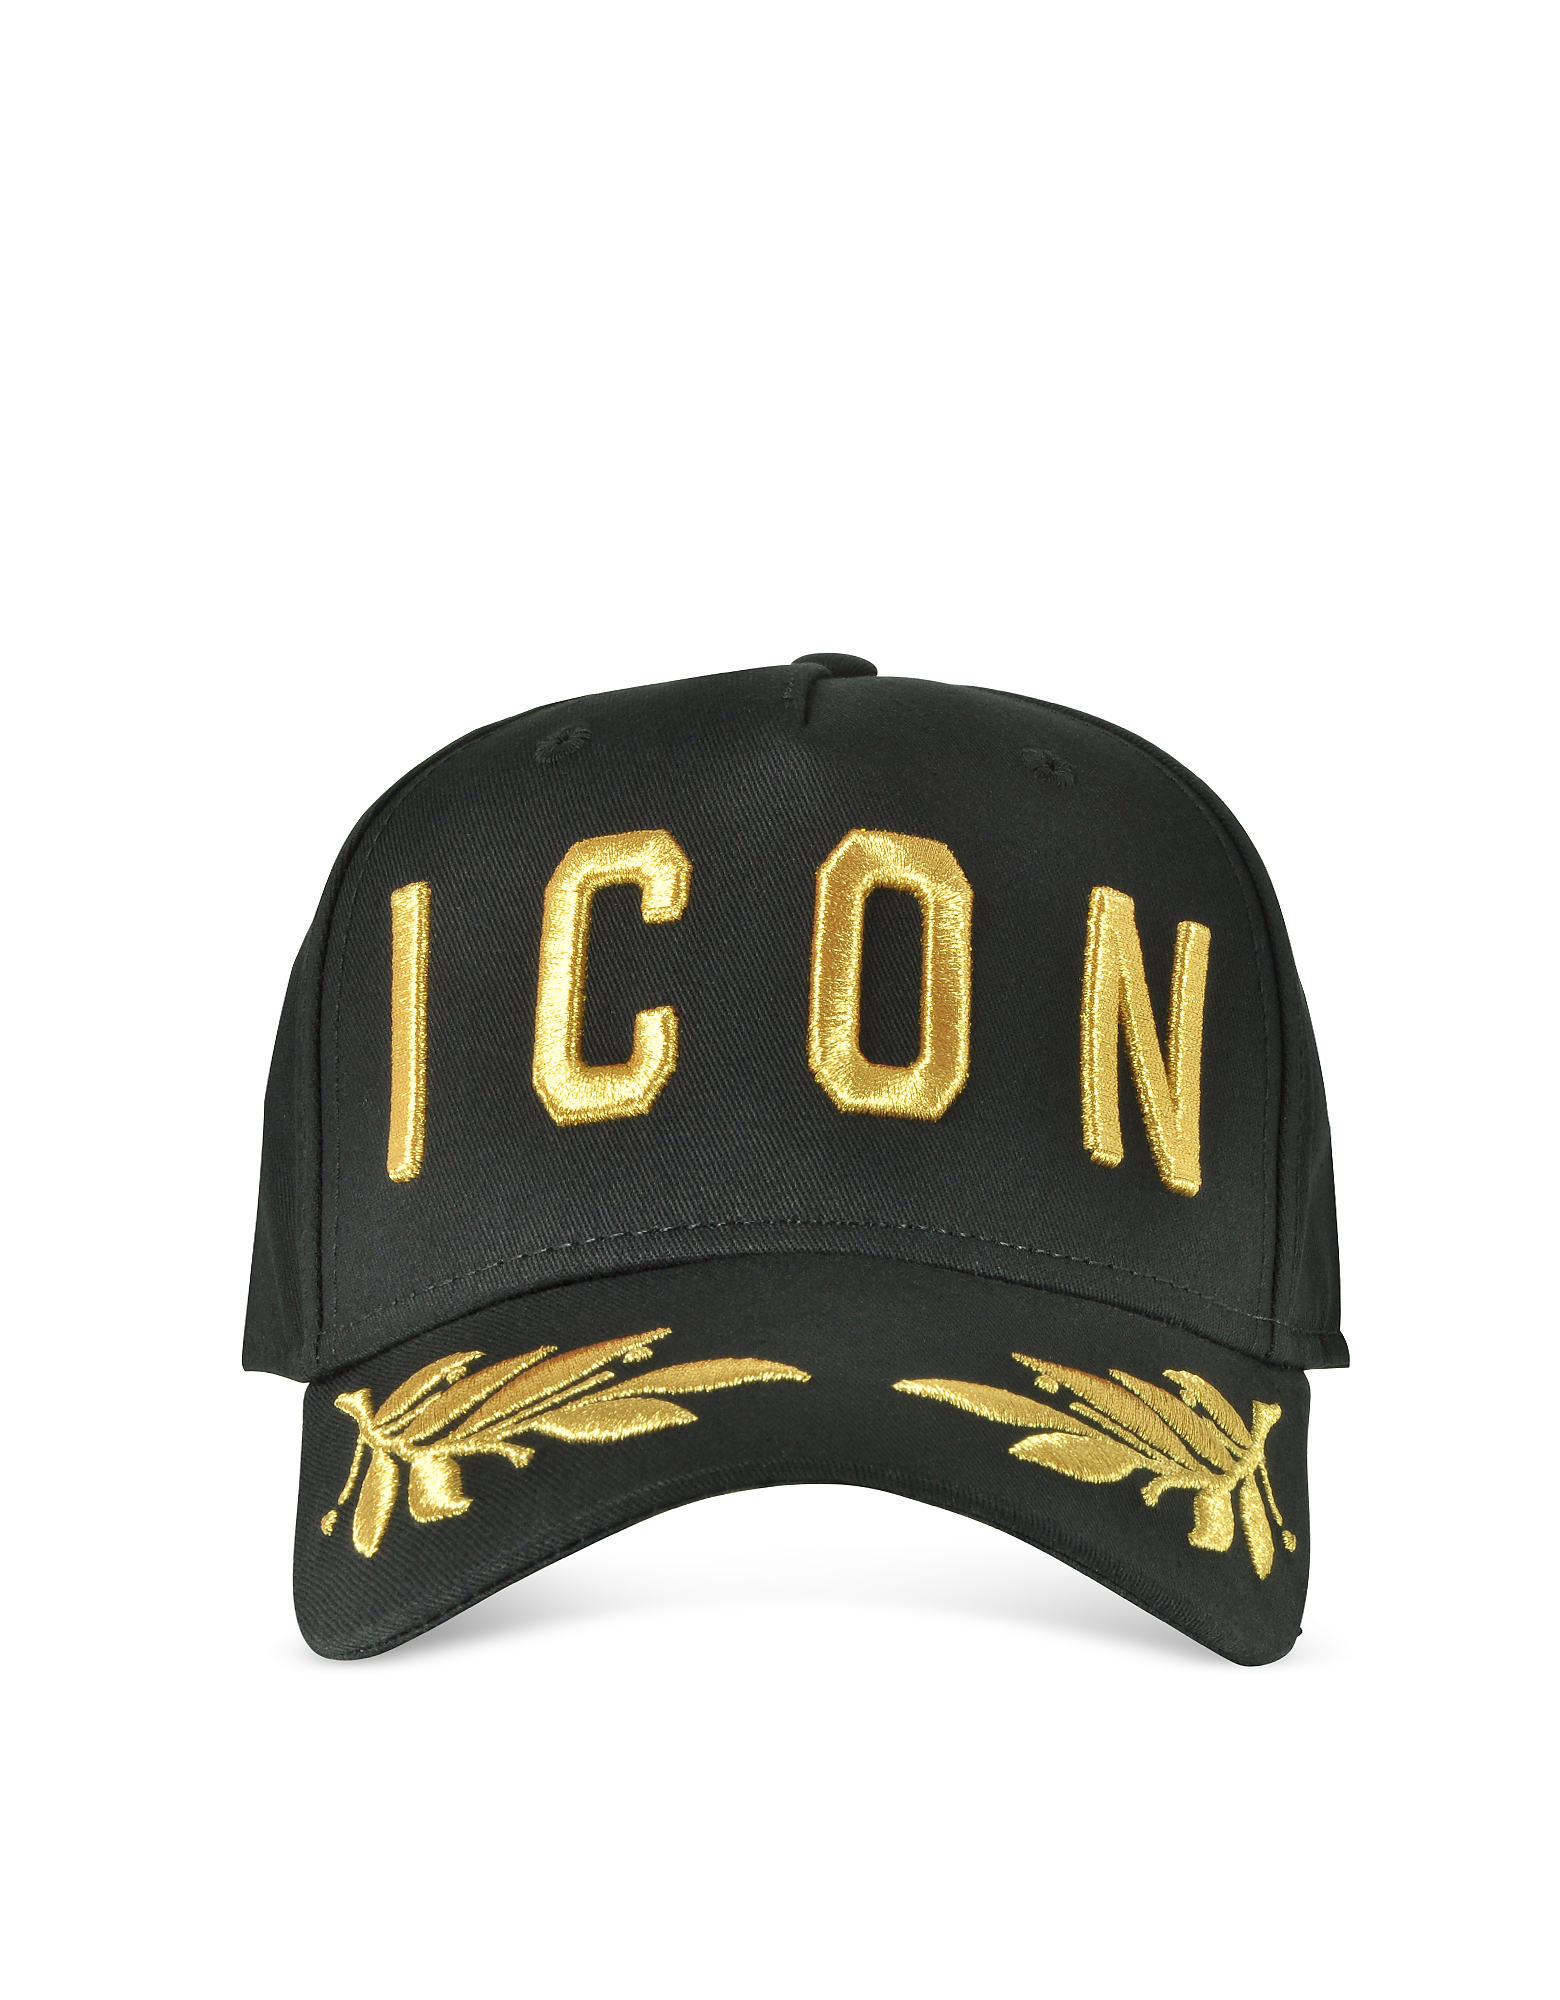 dsquared icon cap black and gold